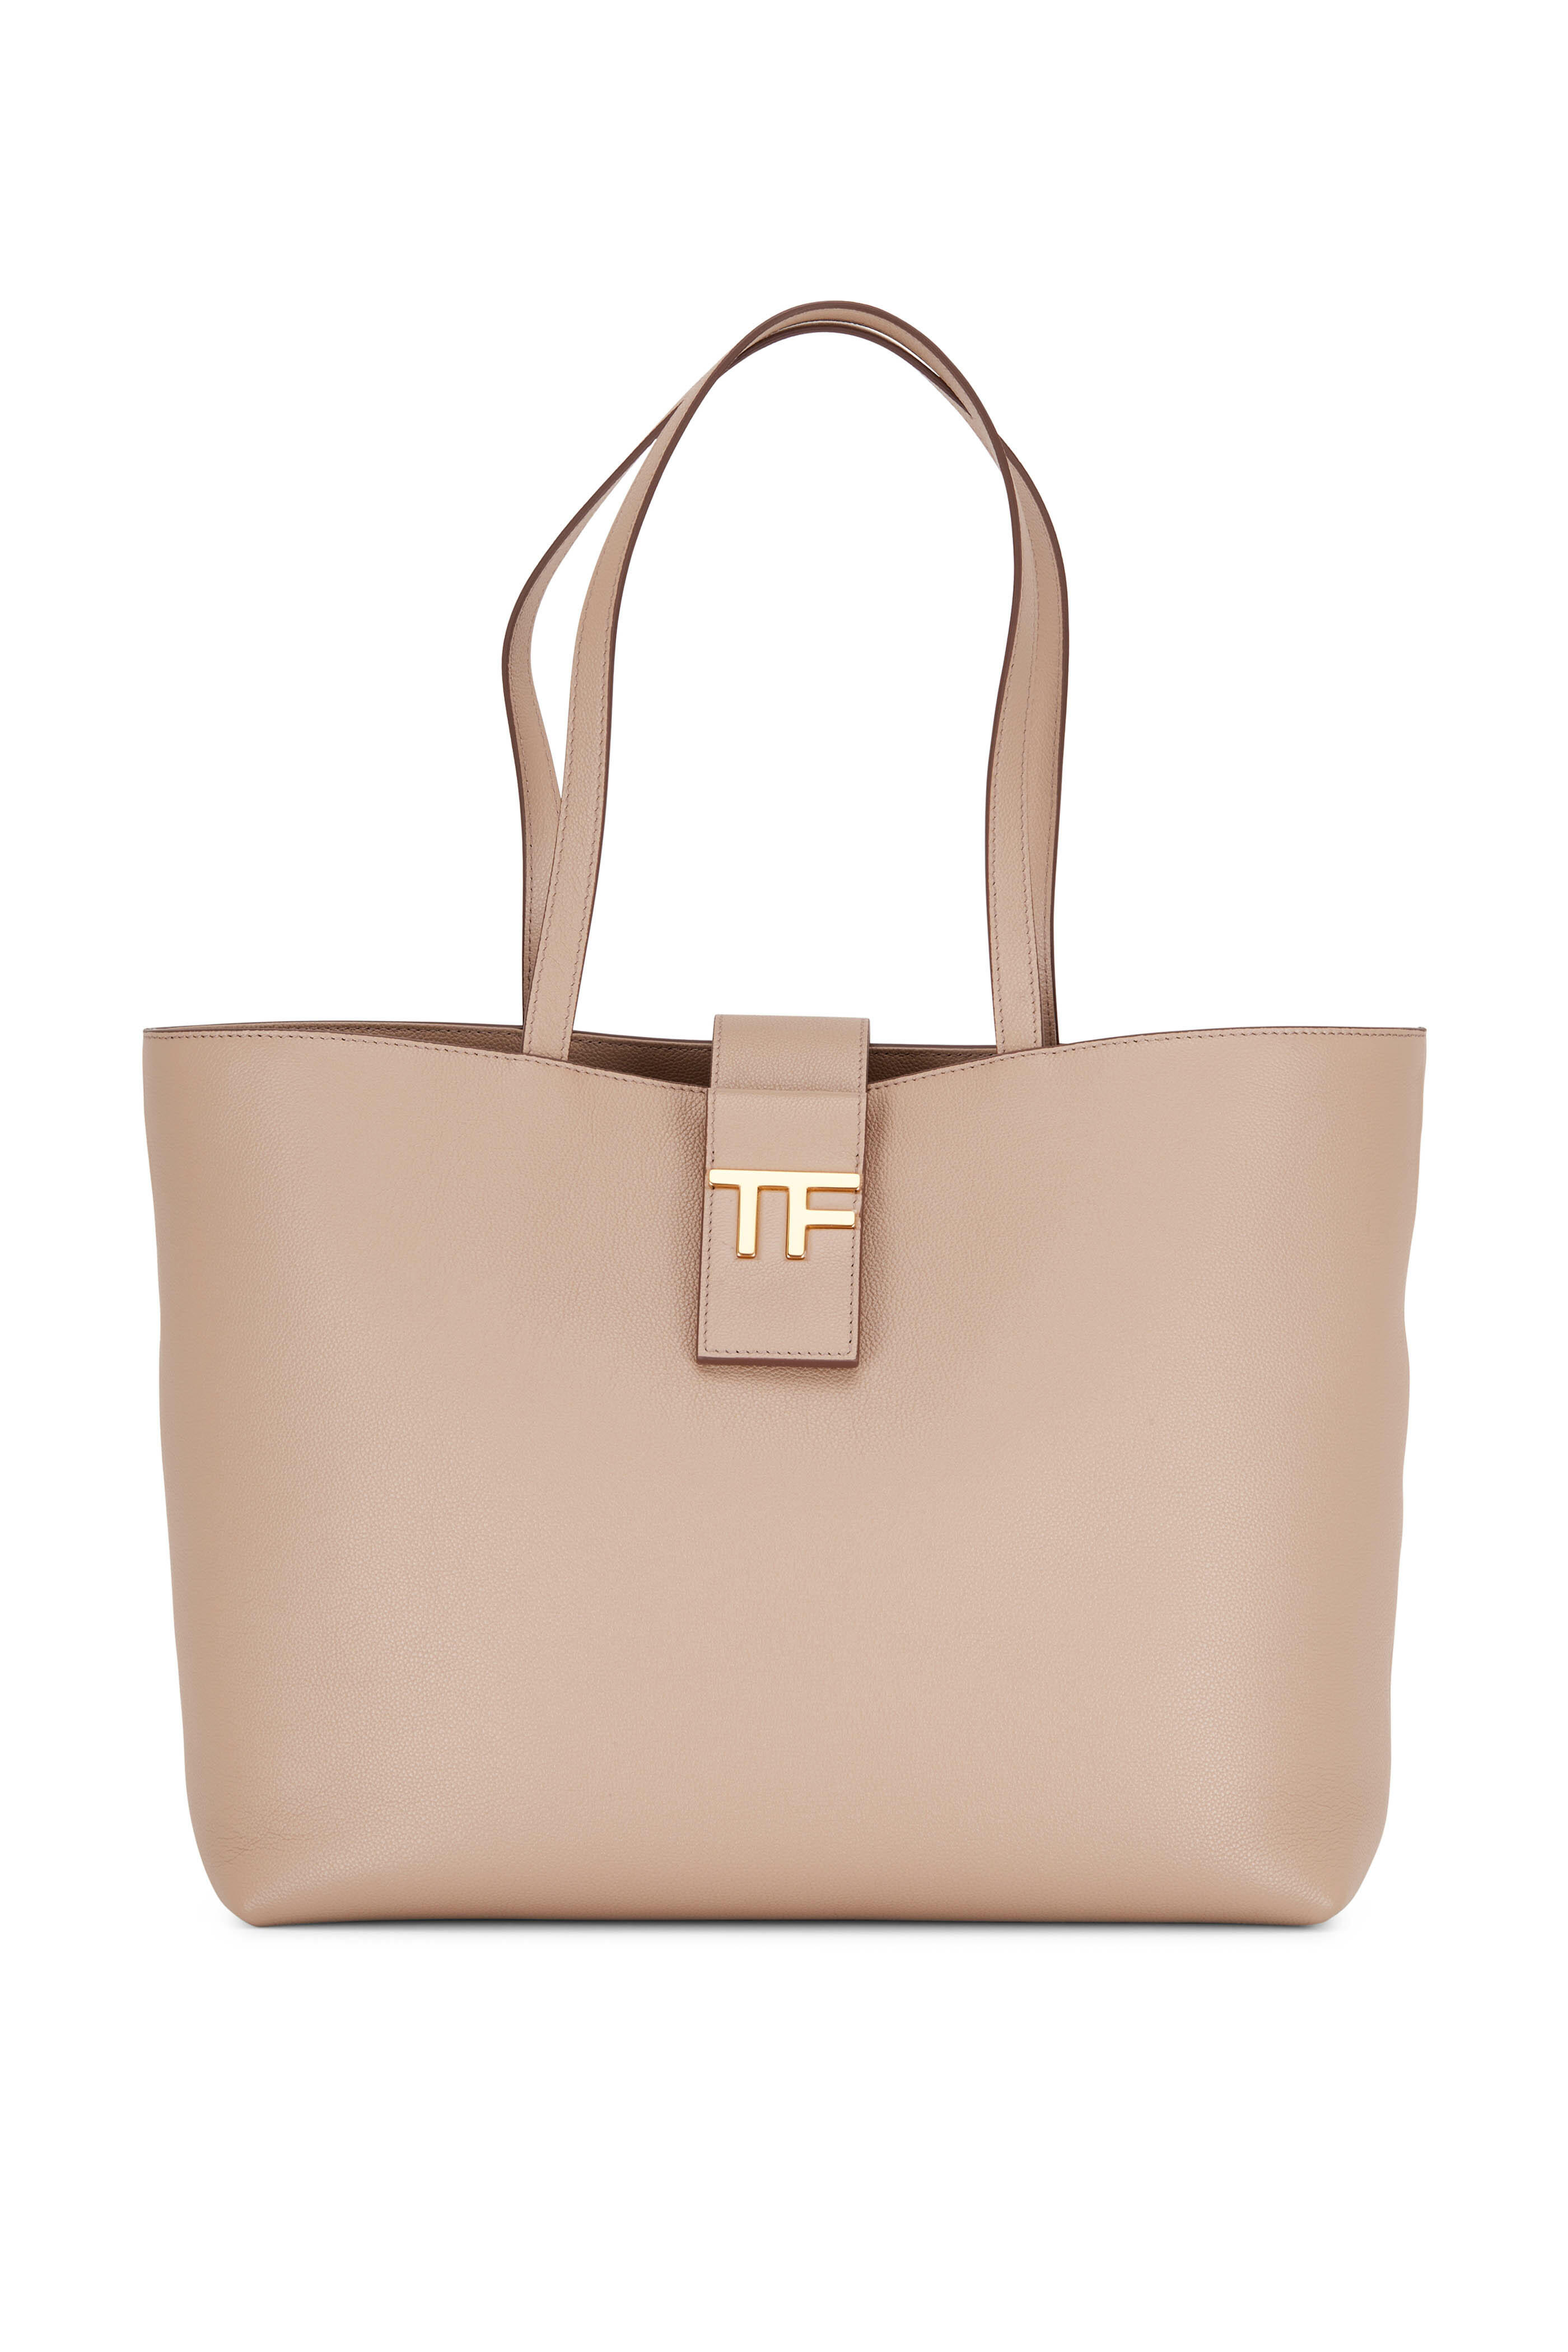 Vientre taiko lección Pronombre Tom Ford - Silk Taupe Grained Leather Tote Bag | Mitchell Stores